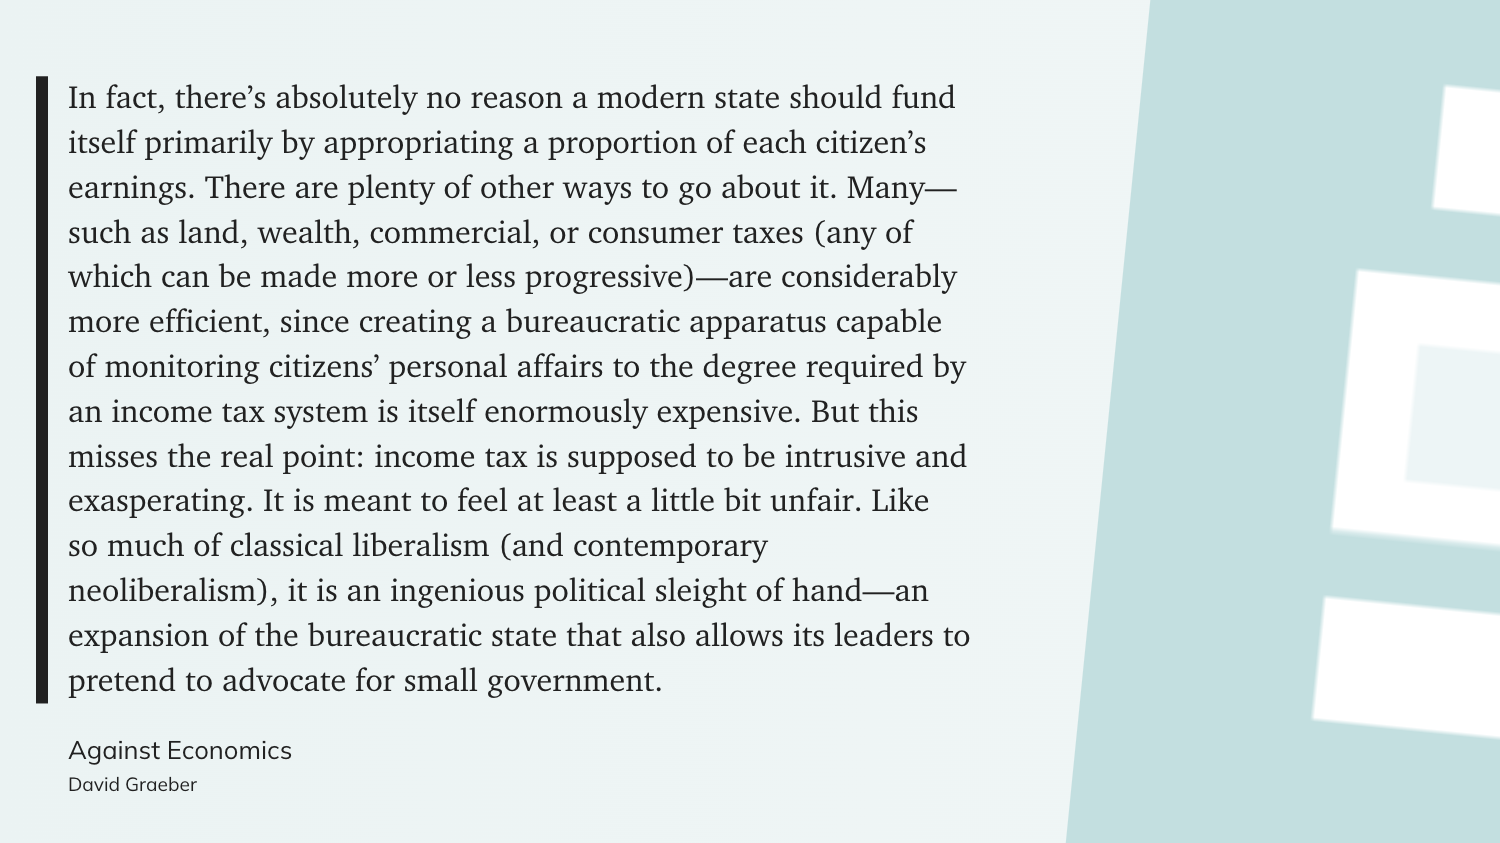 "In fact, there’s absolutely no reason a modern state should fund itself primarily by appropriating a proportion of each citizen’s earnings. There are plenty of other ways to go about it. Many—such as land, wealth, commercial, or consumer taxes (any of which can be made more or less progressive)—are considerably more efficient, since creating a bureaucratic apparatus capable of monitoring citizens’ personal affairs to the degree required by an income tax system is itself enormously expensive. But this misses the real point: income tax is supposed to be intrusive and exasperating. It is meant to feel at least a little bit unfair. Like so much of classical liberalism (and contemporary neoliberalism), it is an ingenious political sleight of hand—an expansion of the bureaucratic state that also allows its leaders to pretend to advocate for small government." (David Graeber, Against Economics)